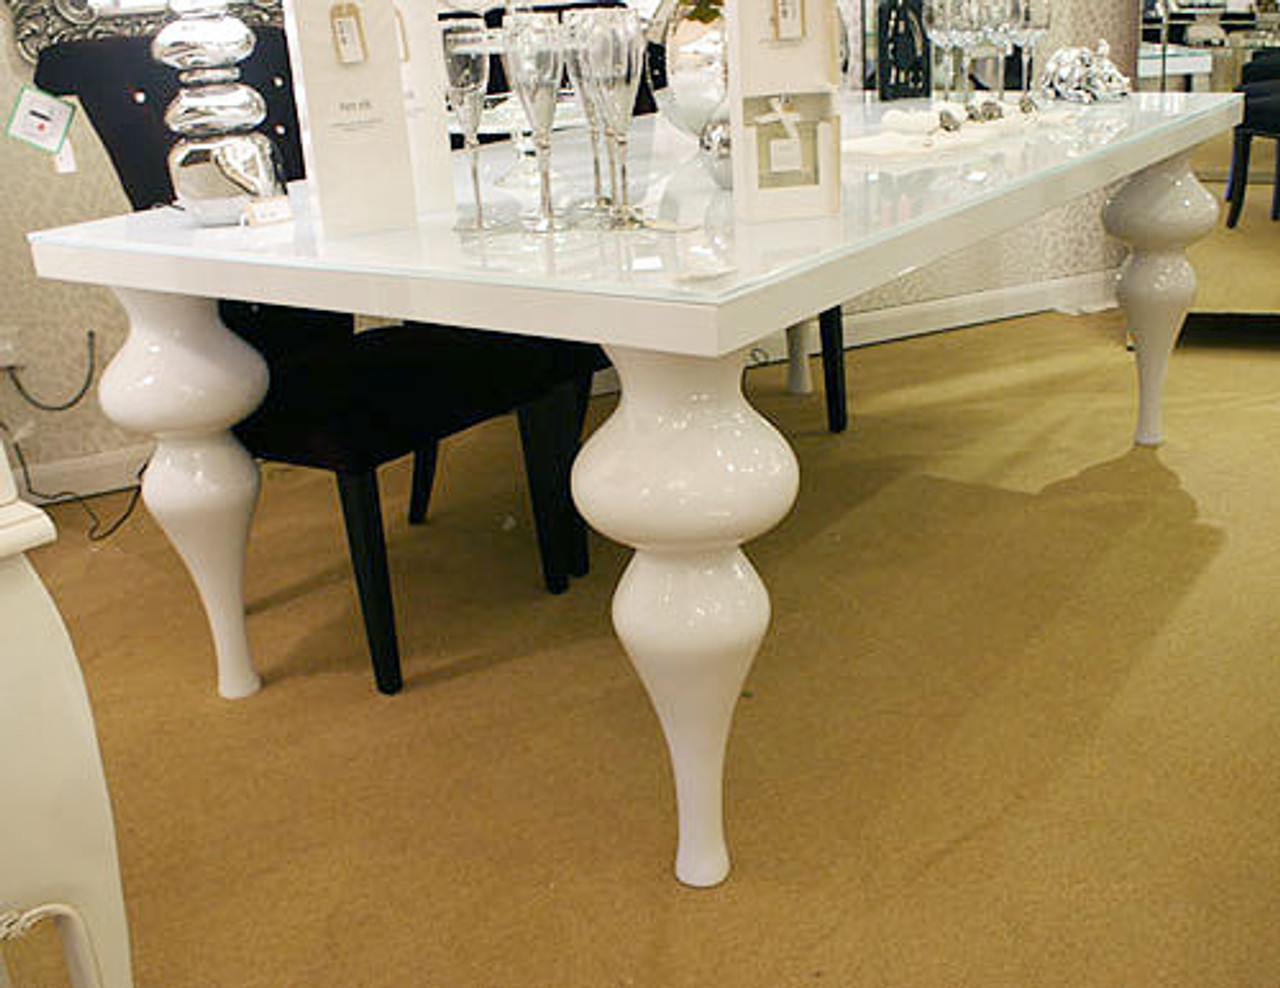 COUTURE - DINING - TABLES - PRODUCTS - NUEVO